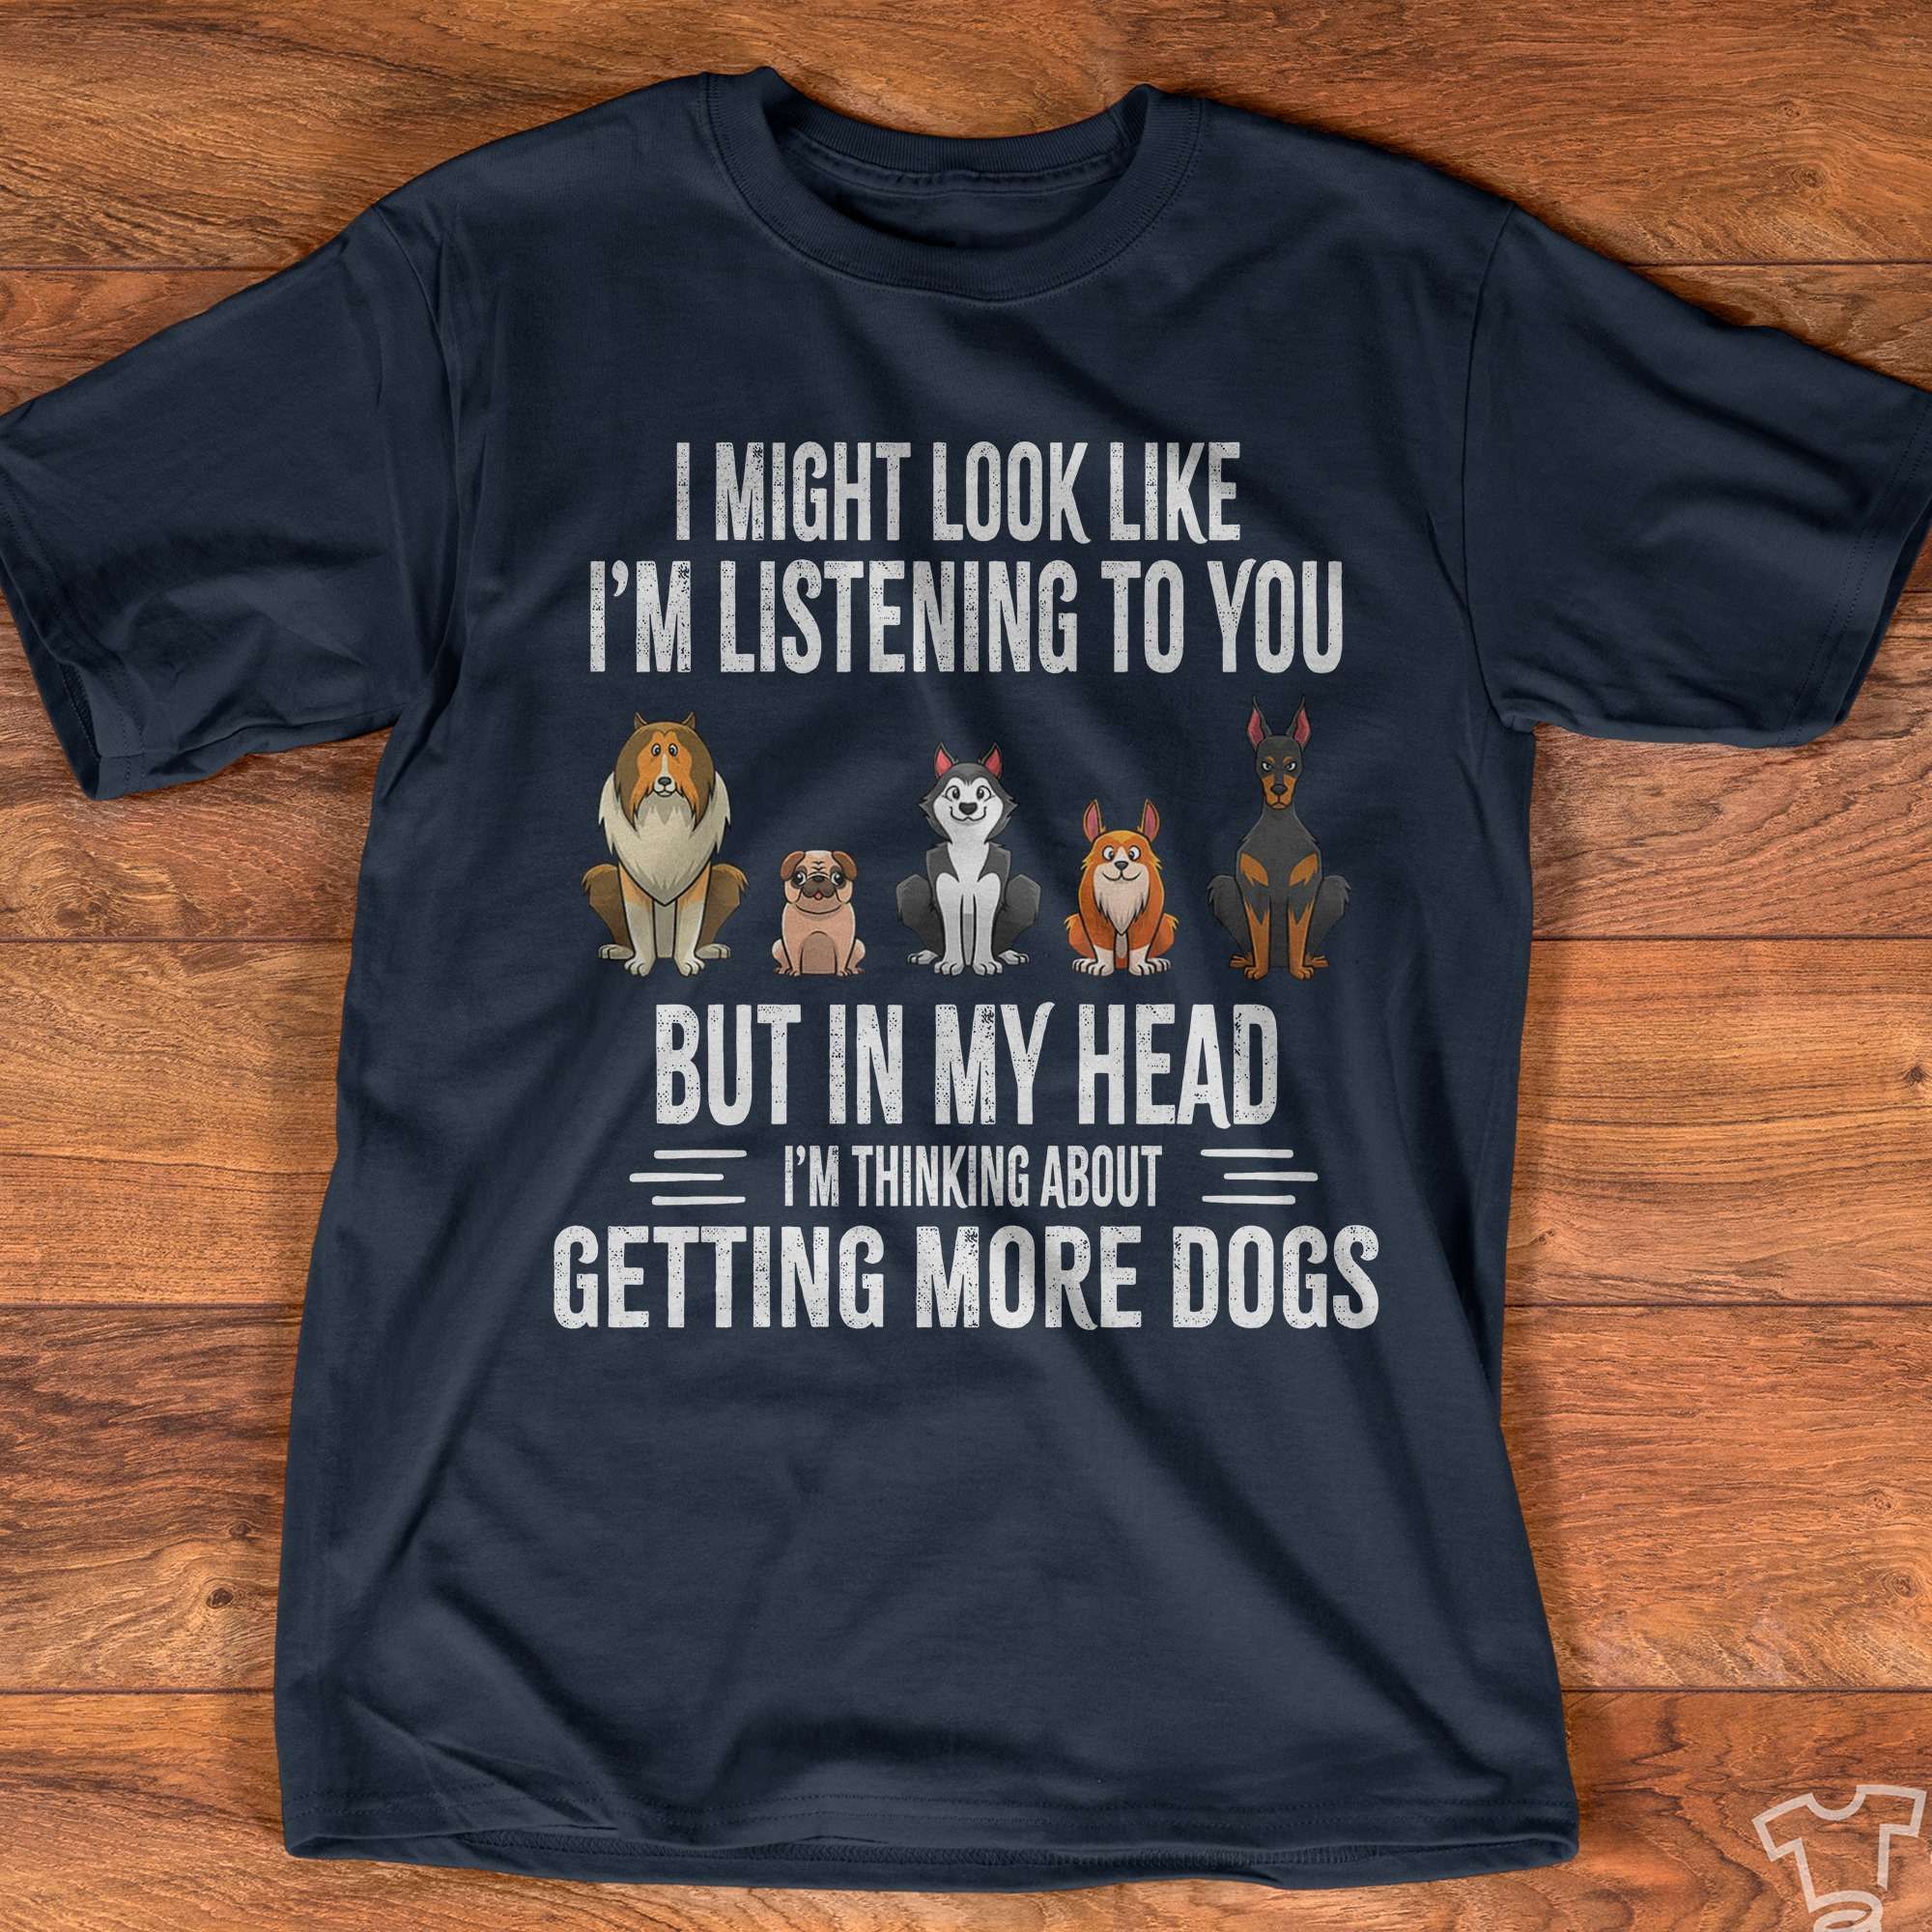 Dog Breeds - I might look like i'mm listening to you but in my head i'm thinking about getting more dogs